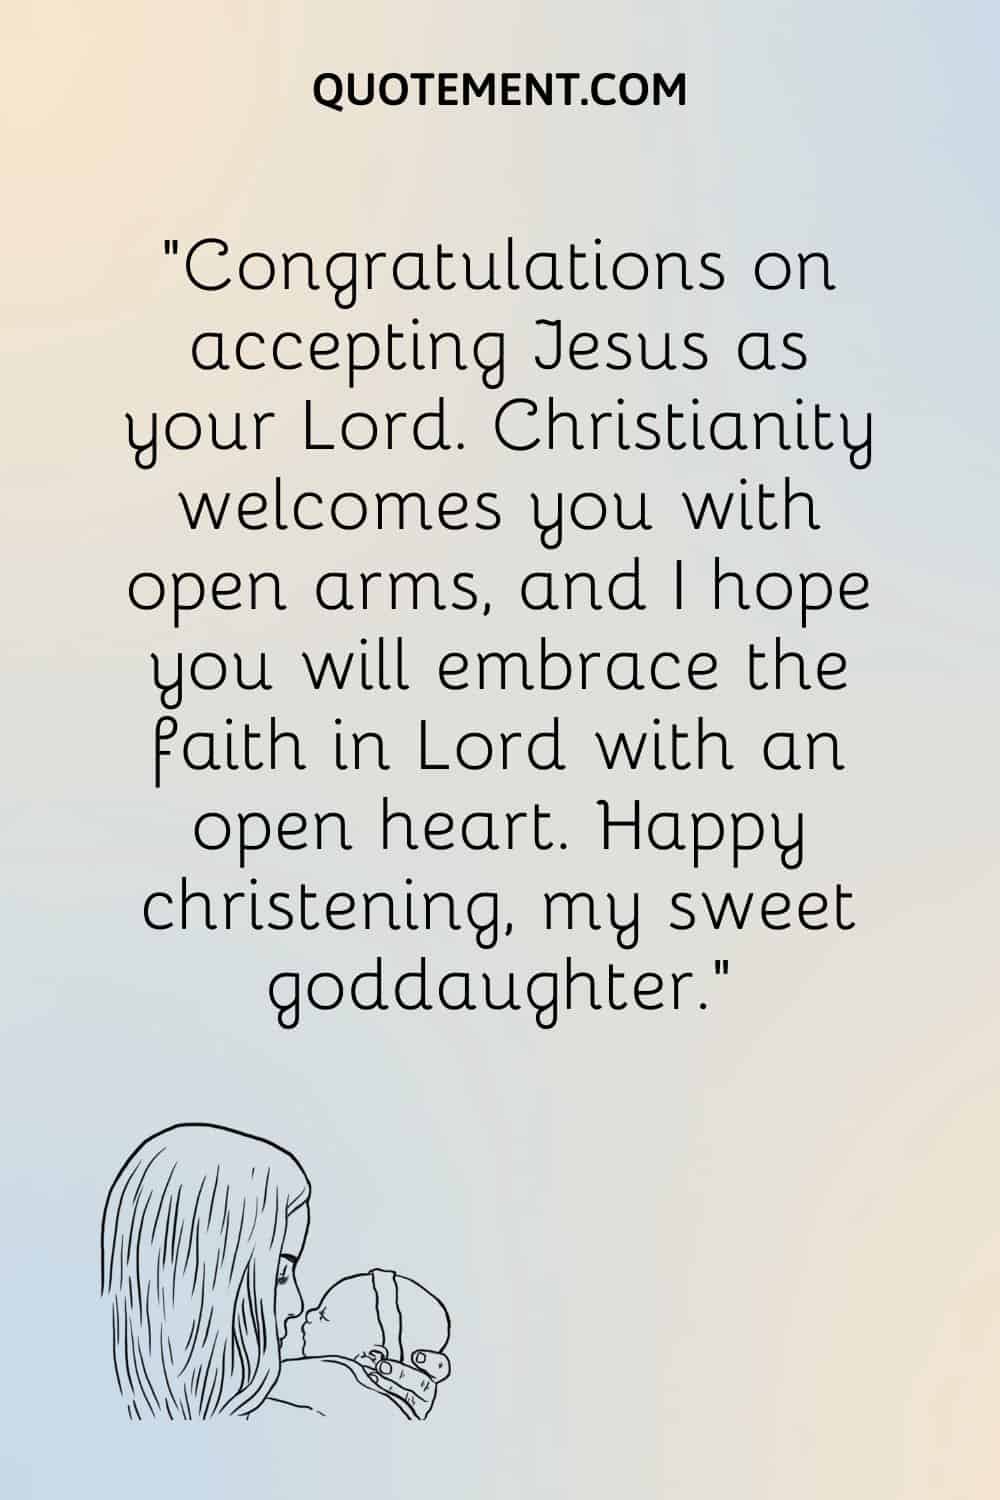 “Congratulations on accepting Jesus as your Lord. Christianity welcomes you with open arms, and I hope you will embrace the faith in Lord with an open heart. Happy christening, my sweet goddaughter.”